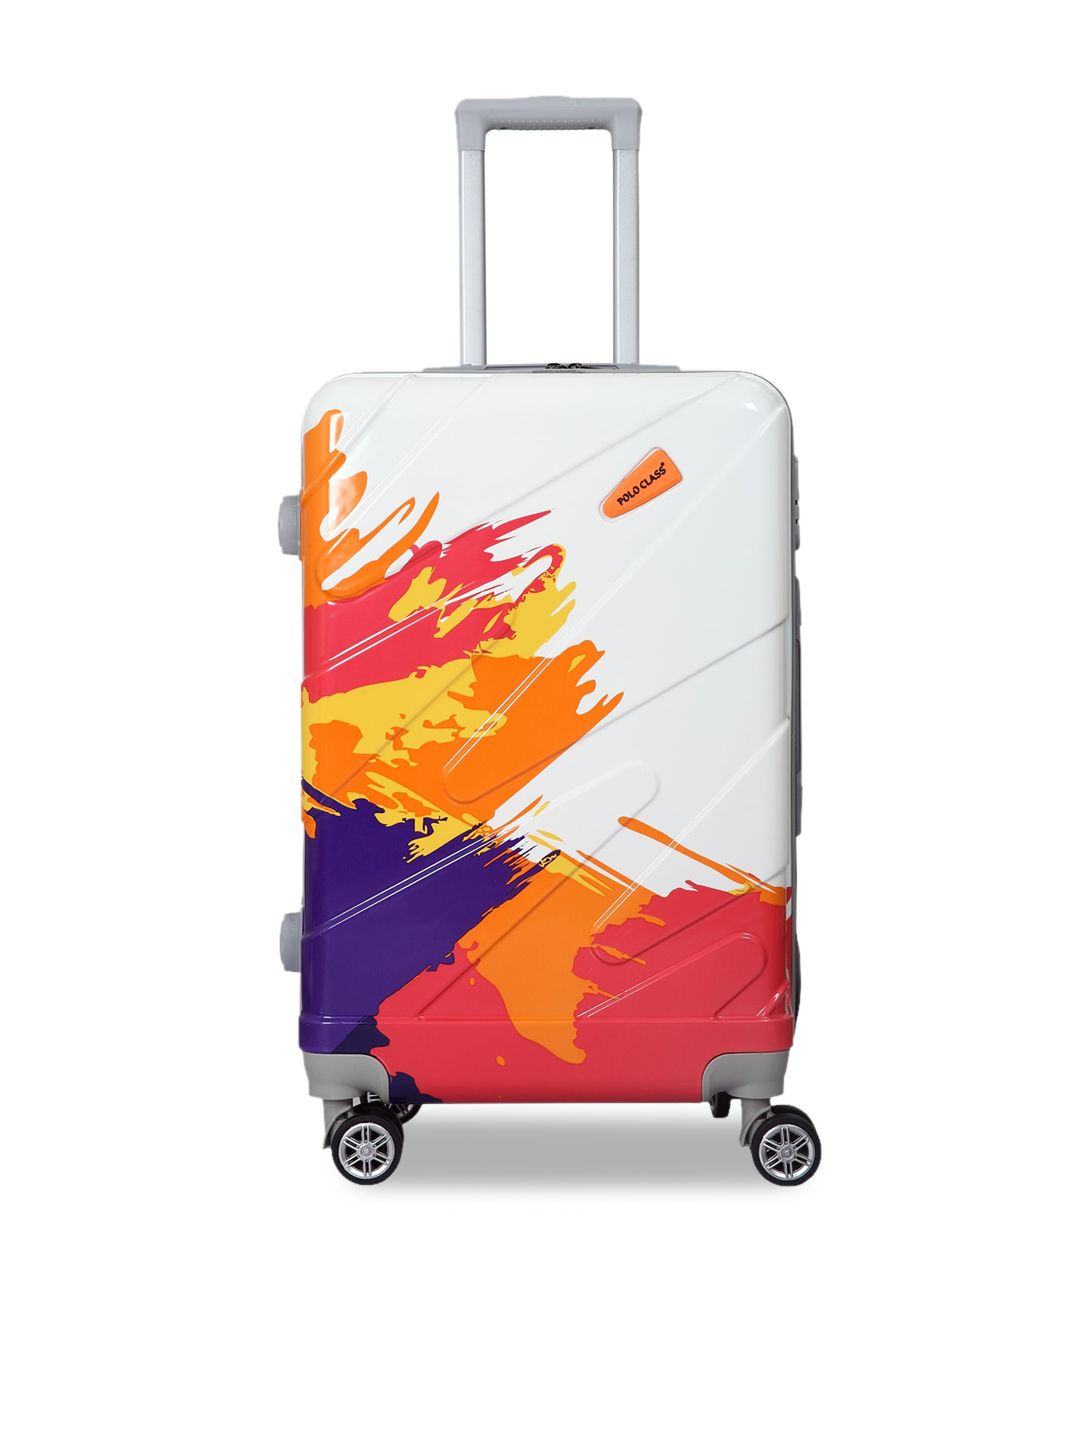 Polo Class White & Orange Printed Trolley Bag-24 Inch Price in India